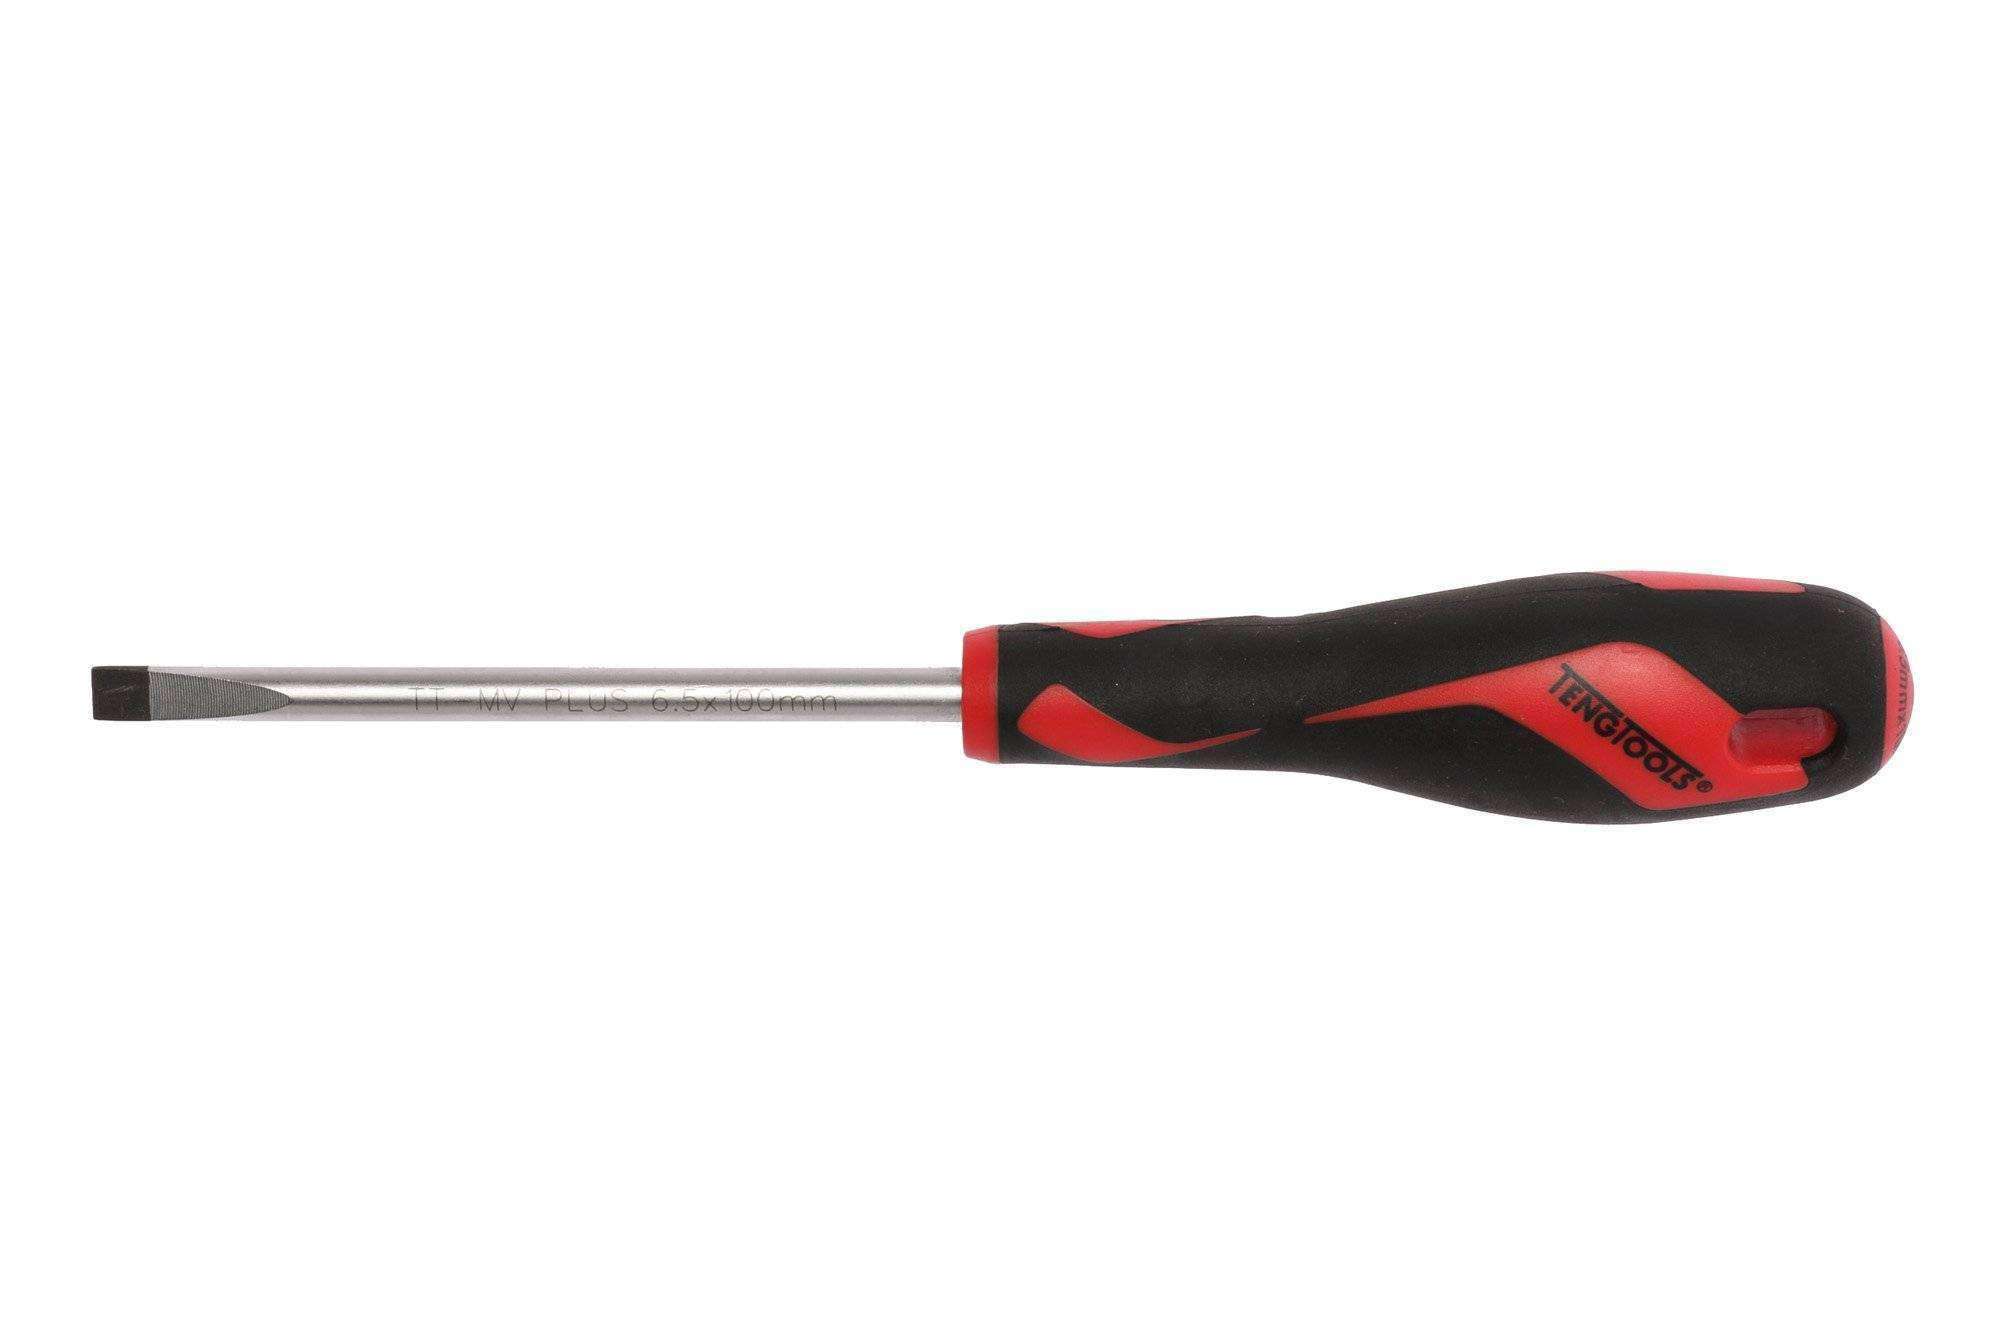 Teng Tools 6.5mm / 1/4 Inch x 100mm / 3.9 Inch Long Flat Type Slotted Head Screwdriver - MD928N4